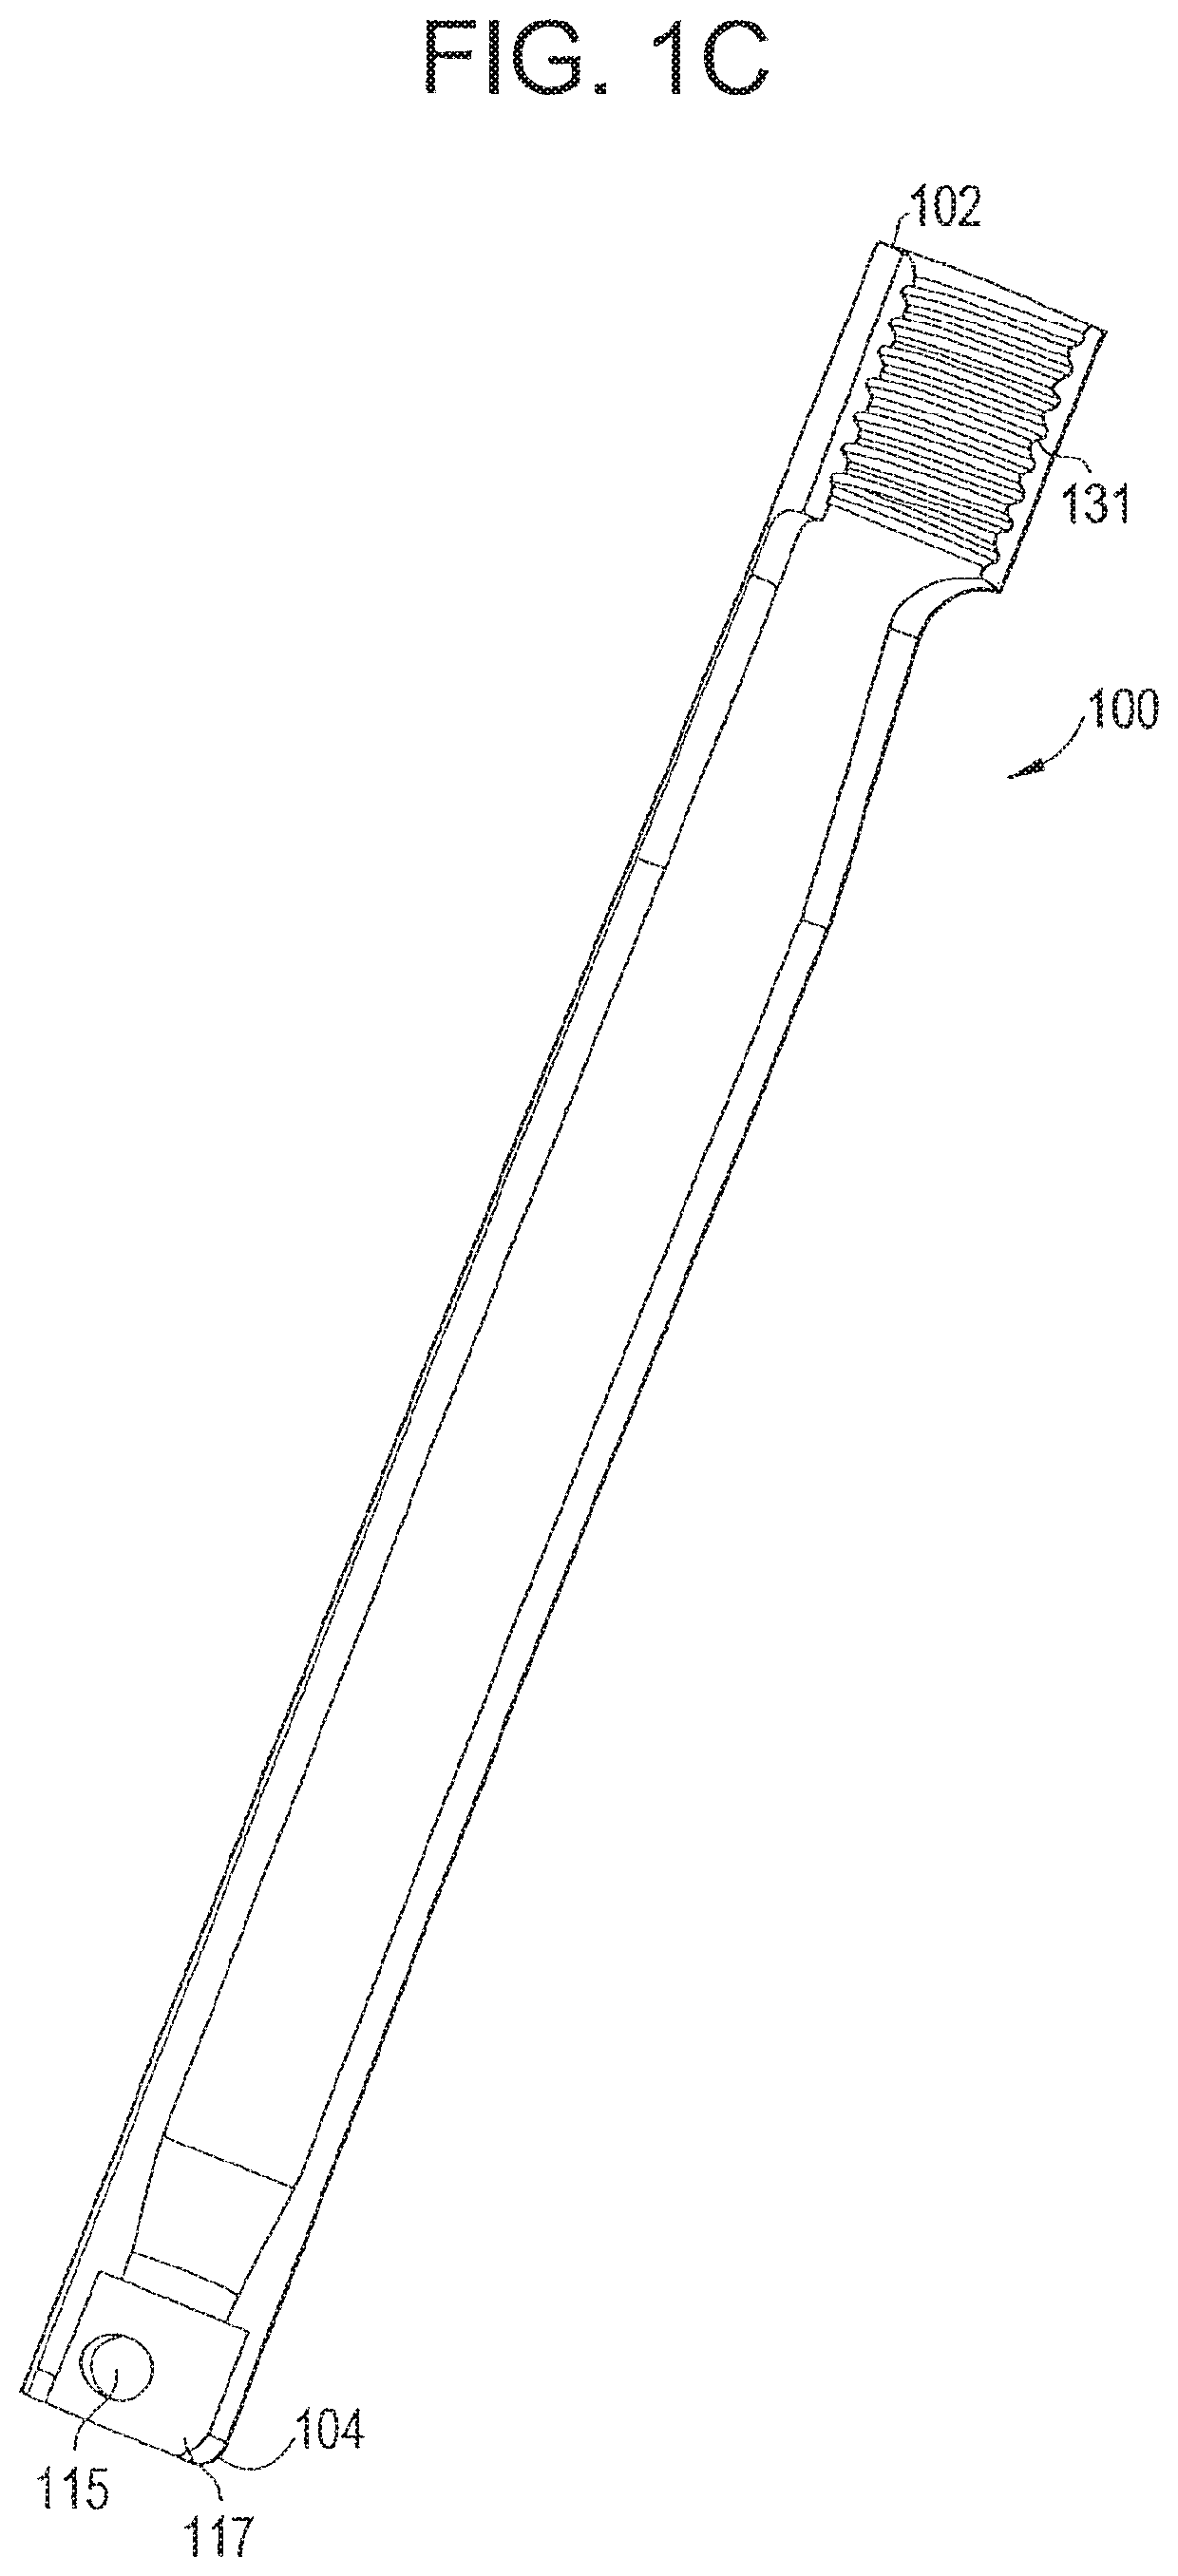 Rod inserter and methods of use